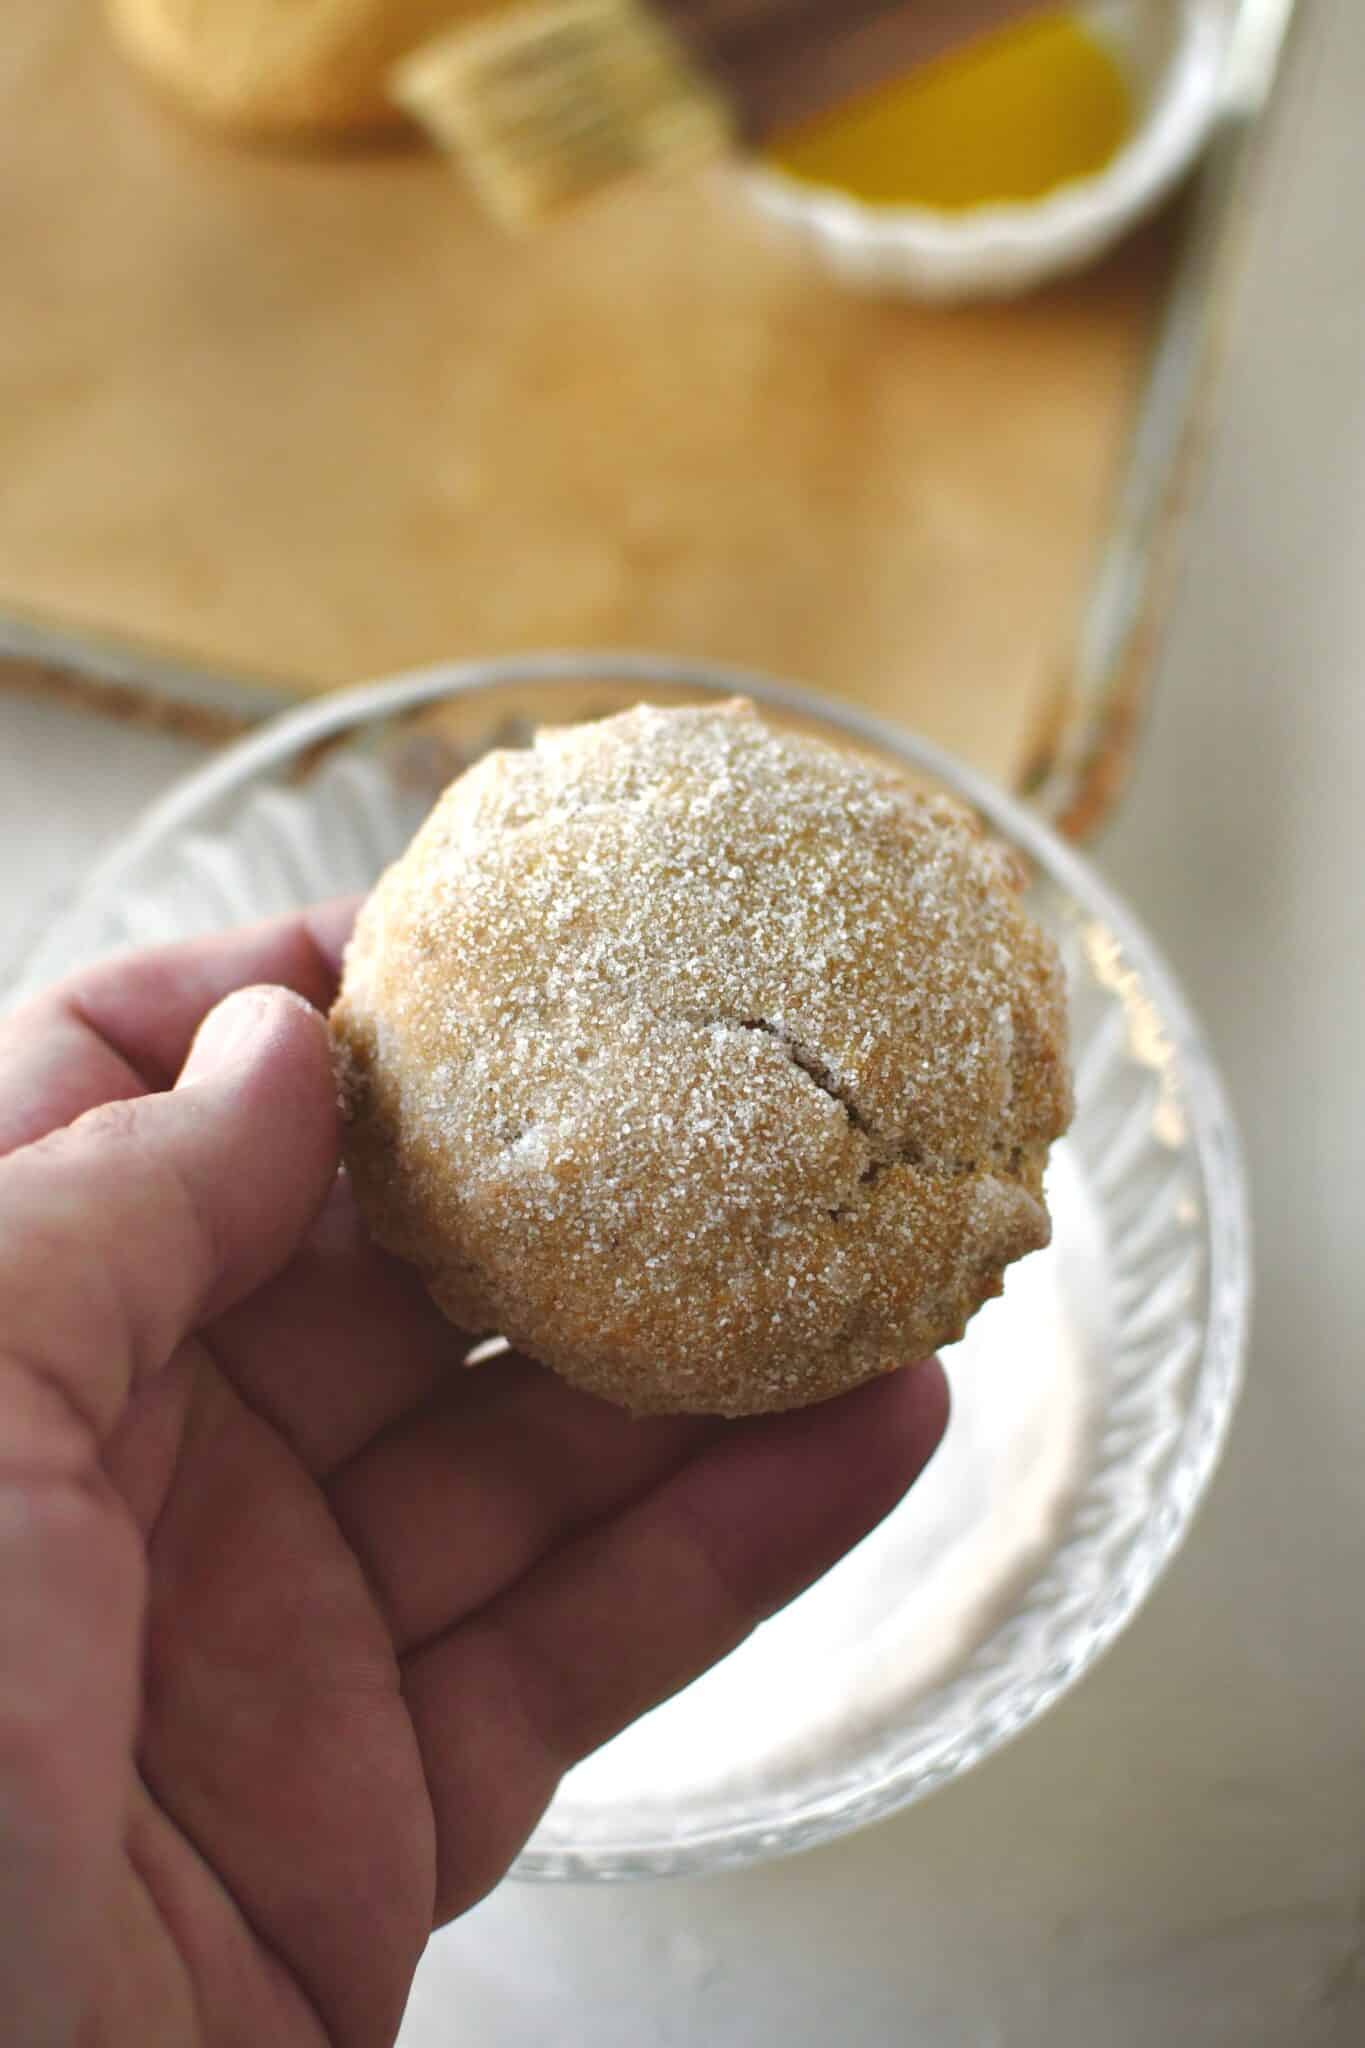 Whoopie pie that has been buttered and dipped in sugar.